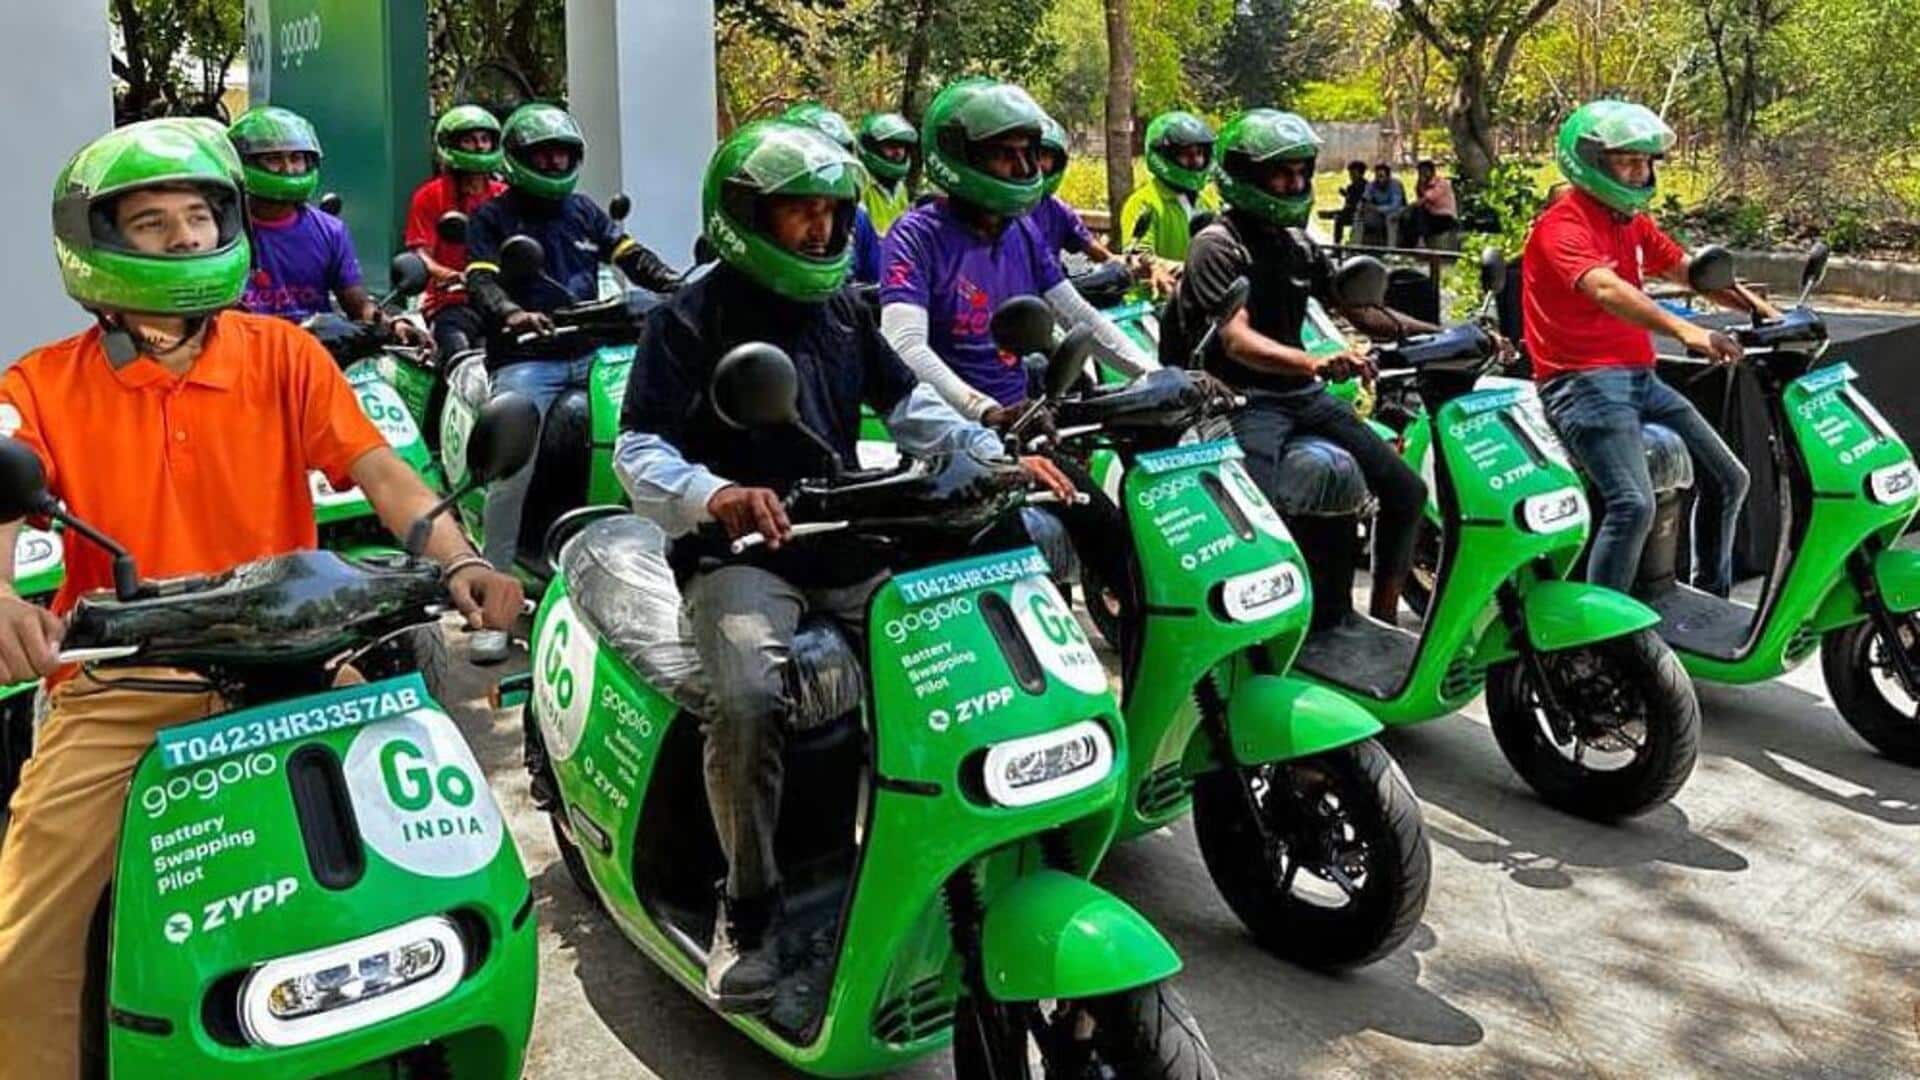 Gogoro arrives in India with battery swapping stations, electric scooter